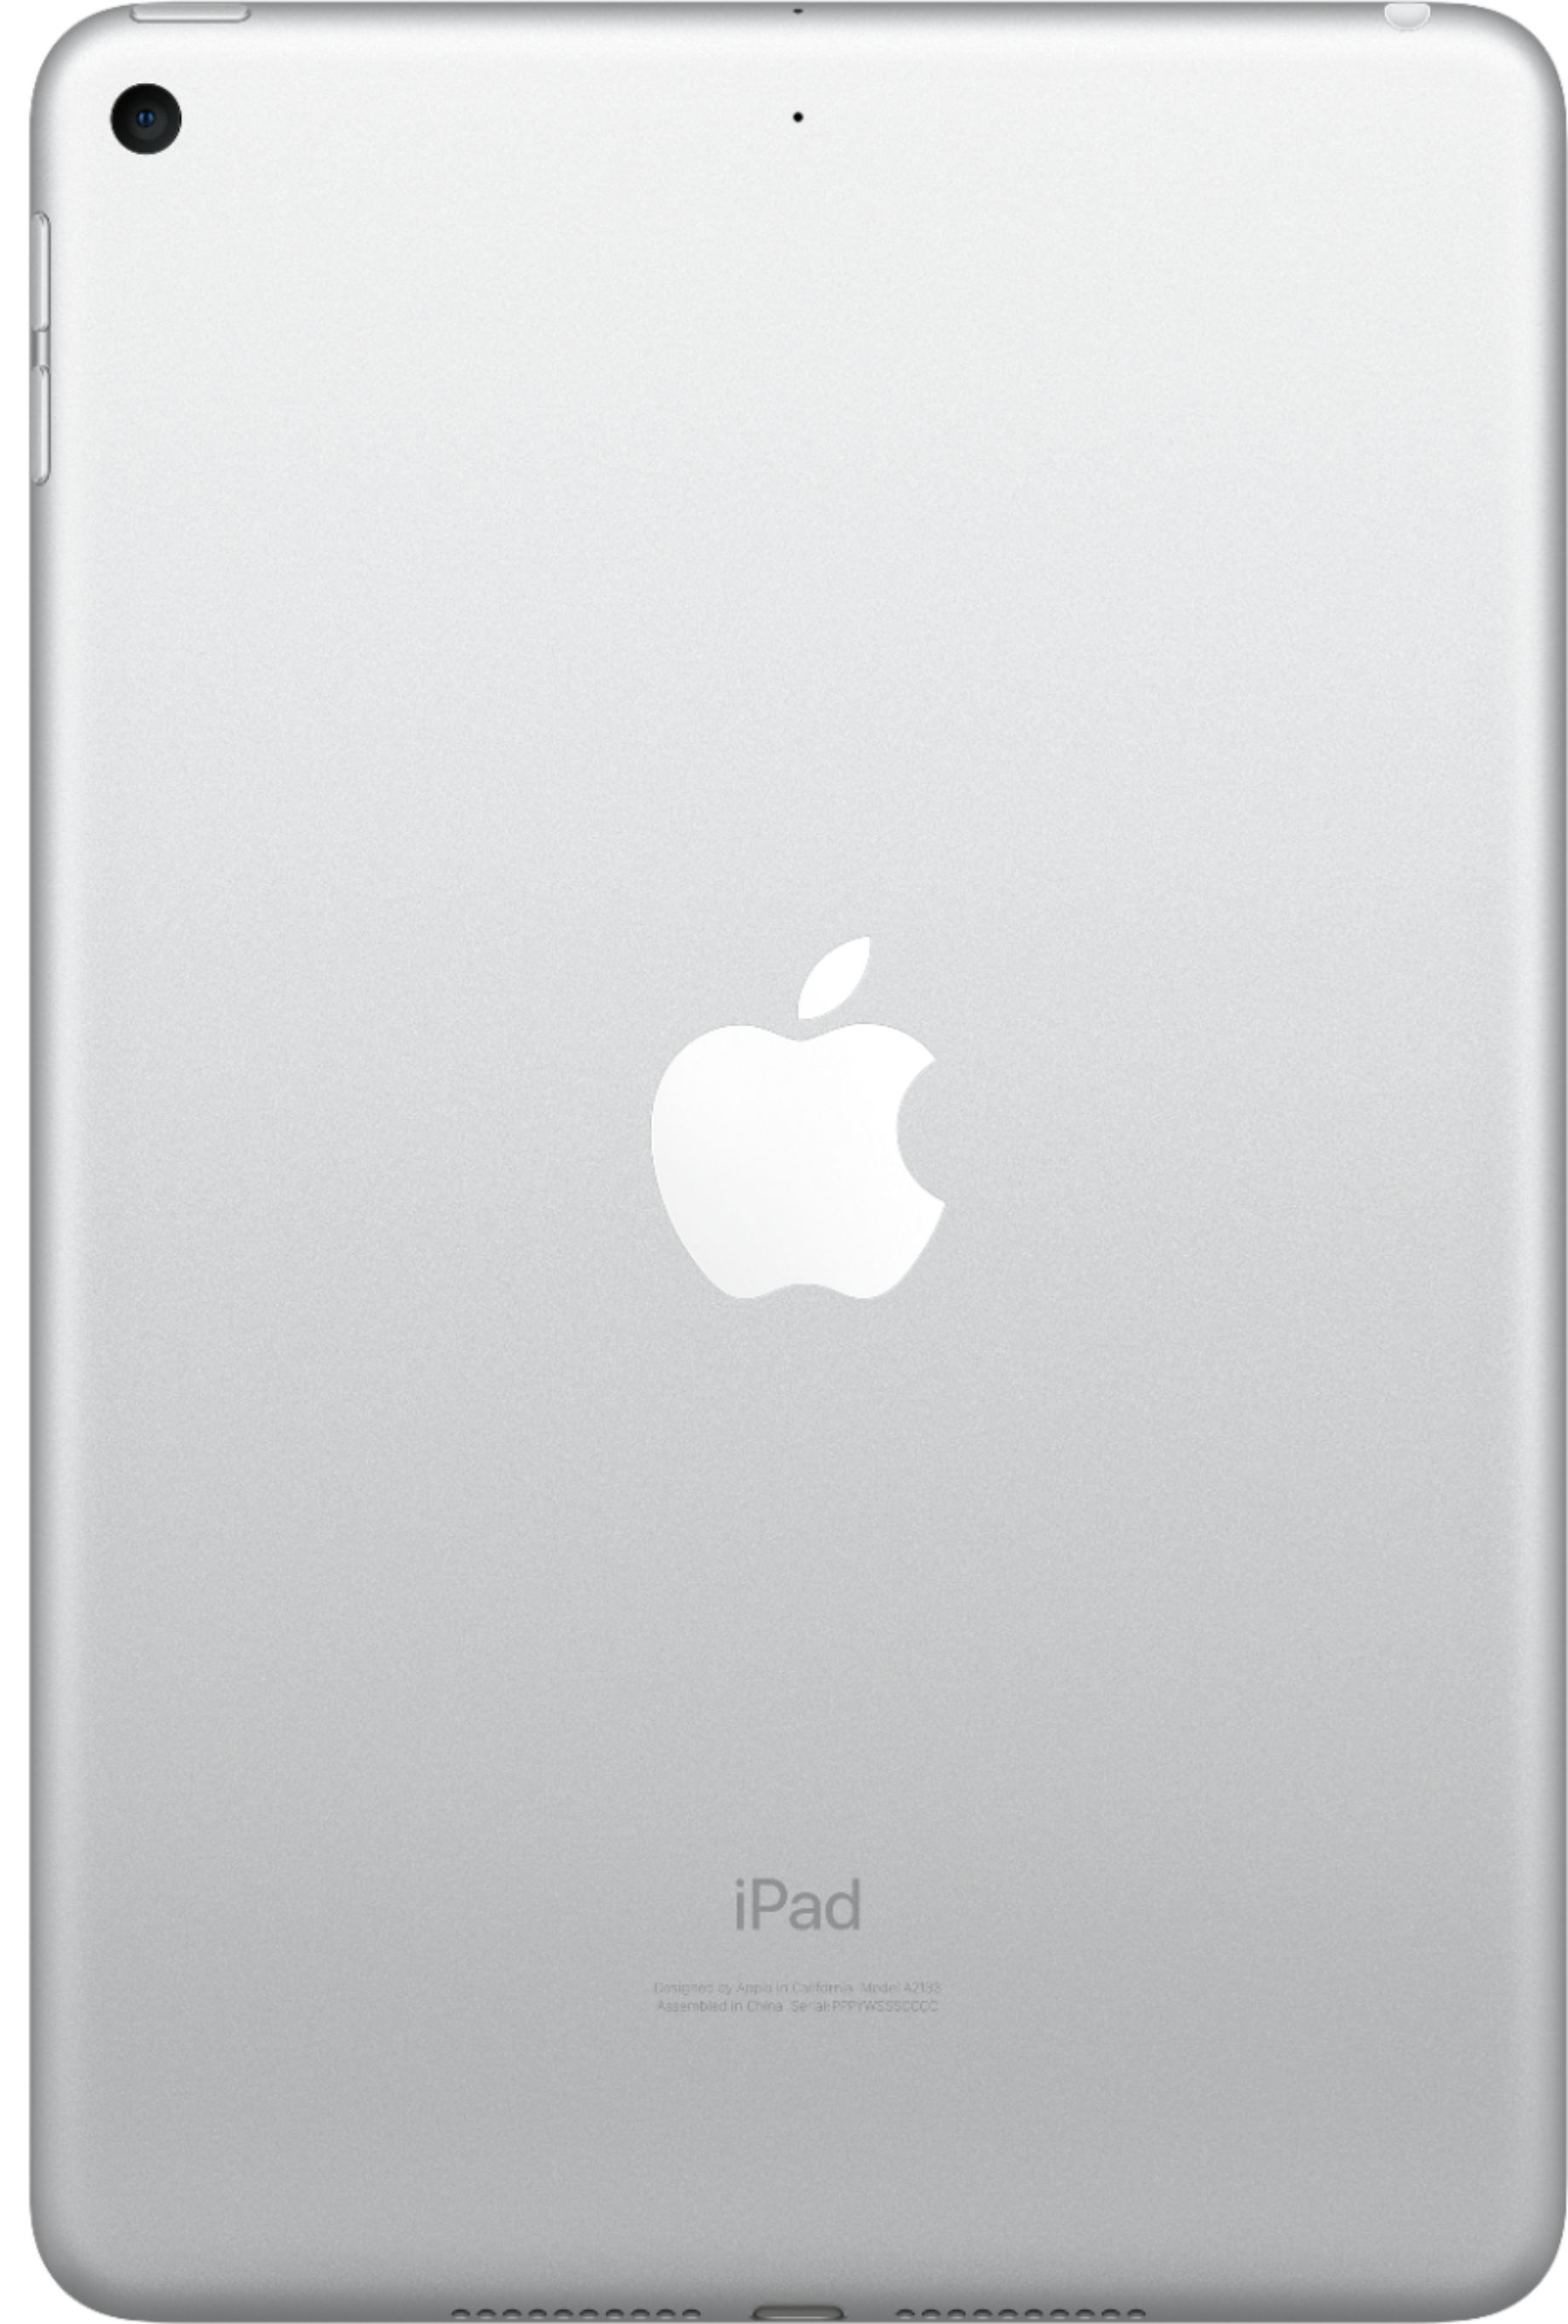 Back View: AppleCare+ for iPad 10.2 - 2 Year Plan